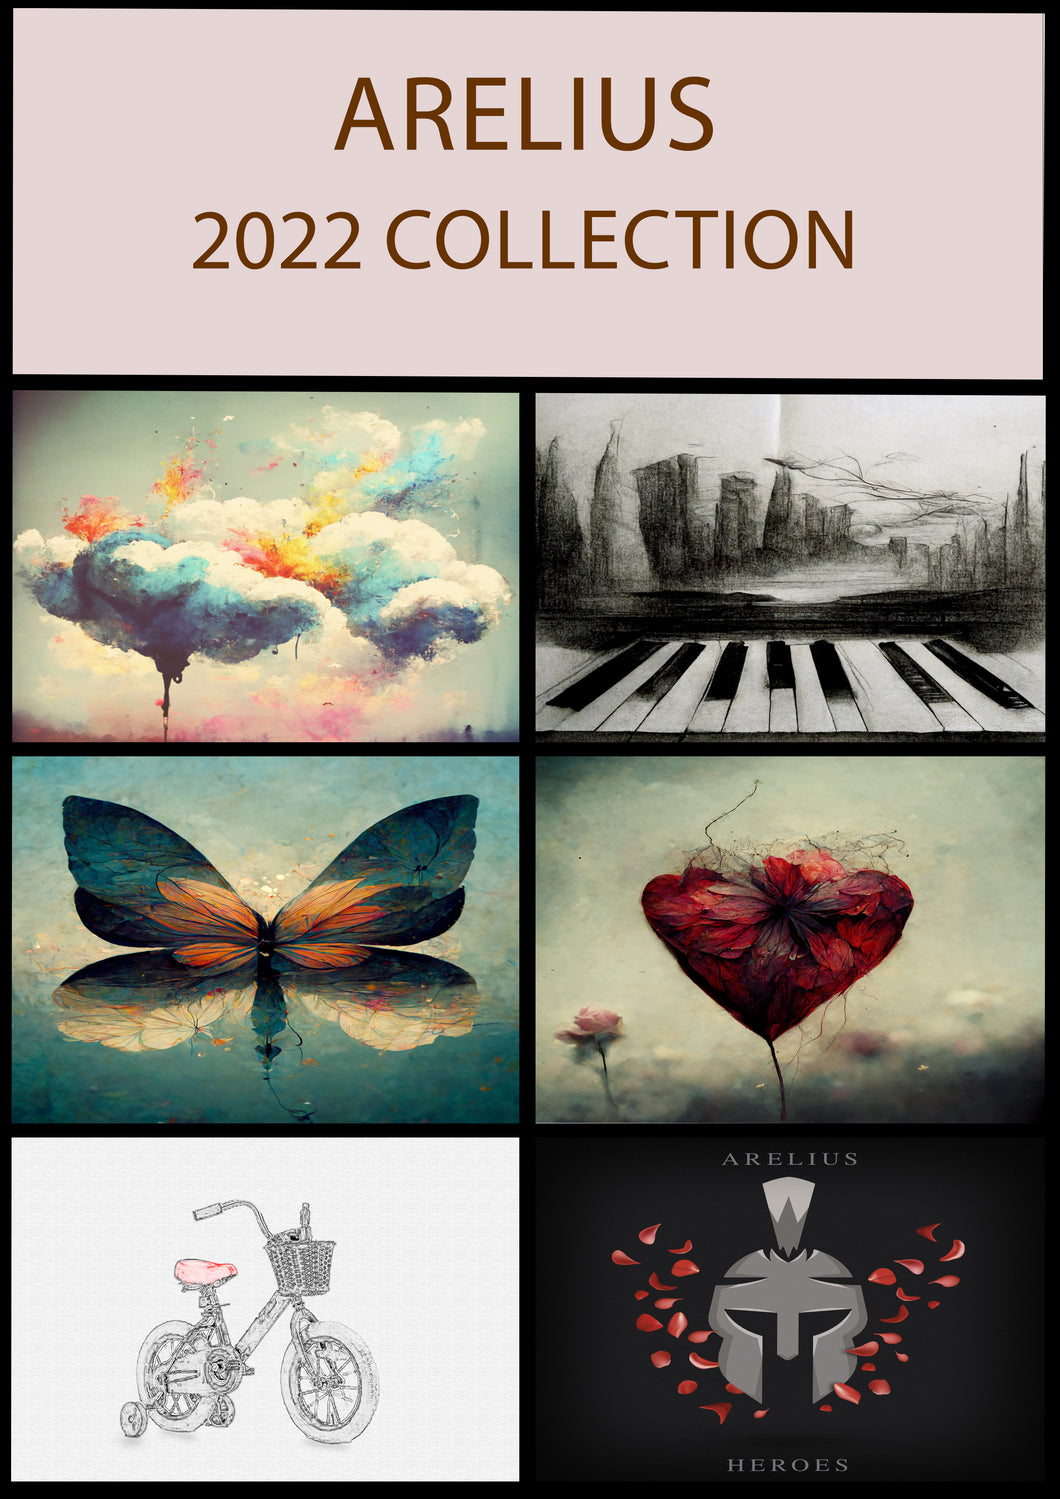 Arelius 2022 Collection - Piano solo Sheet Music released in 2022